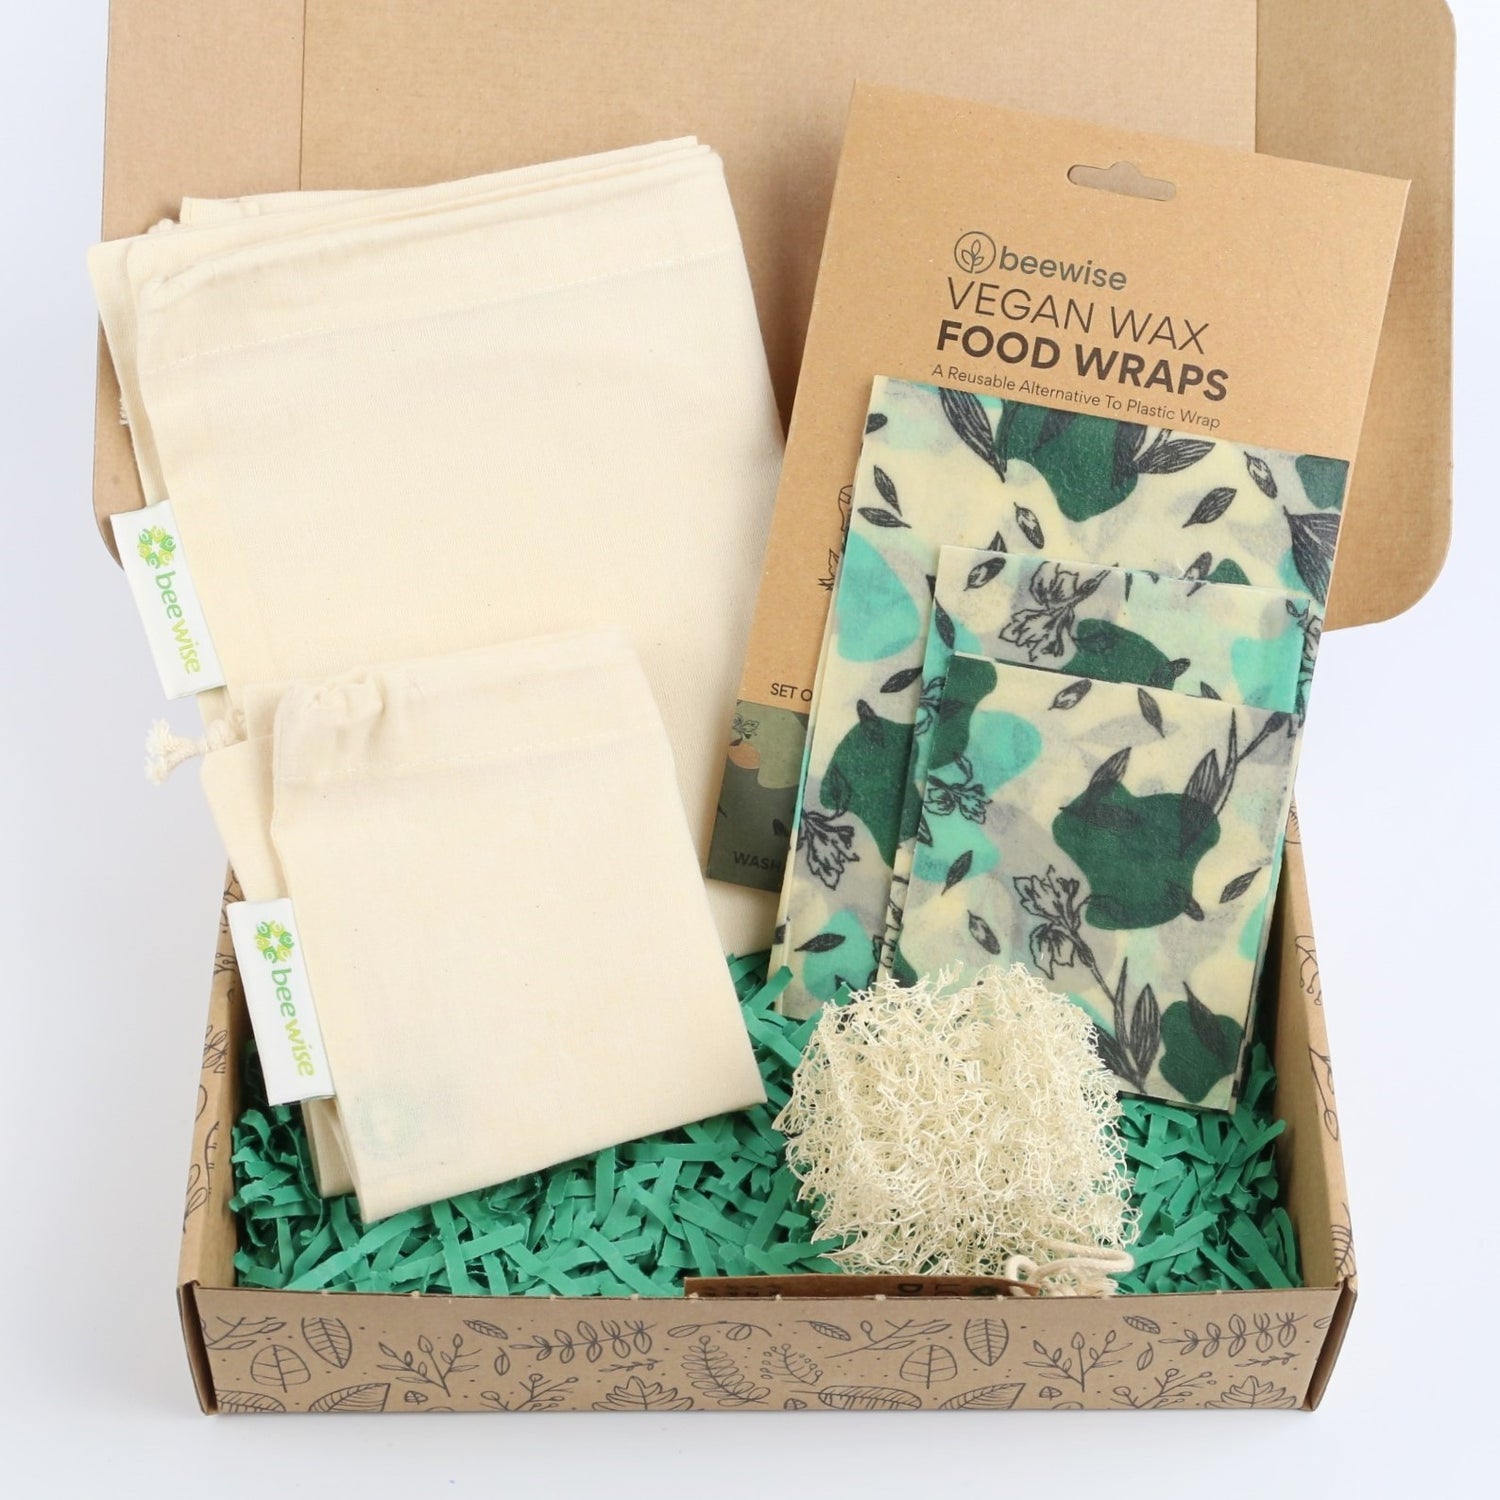 eco gift box with sustainable products with produce cotton bags, vegan wraps and loofah dish sponge